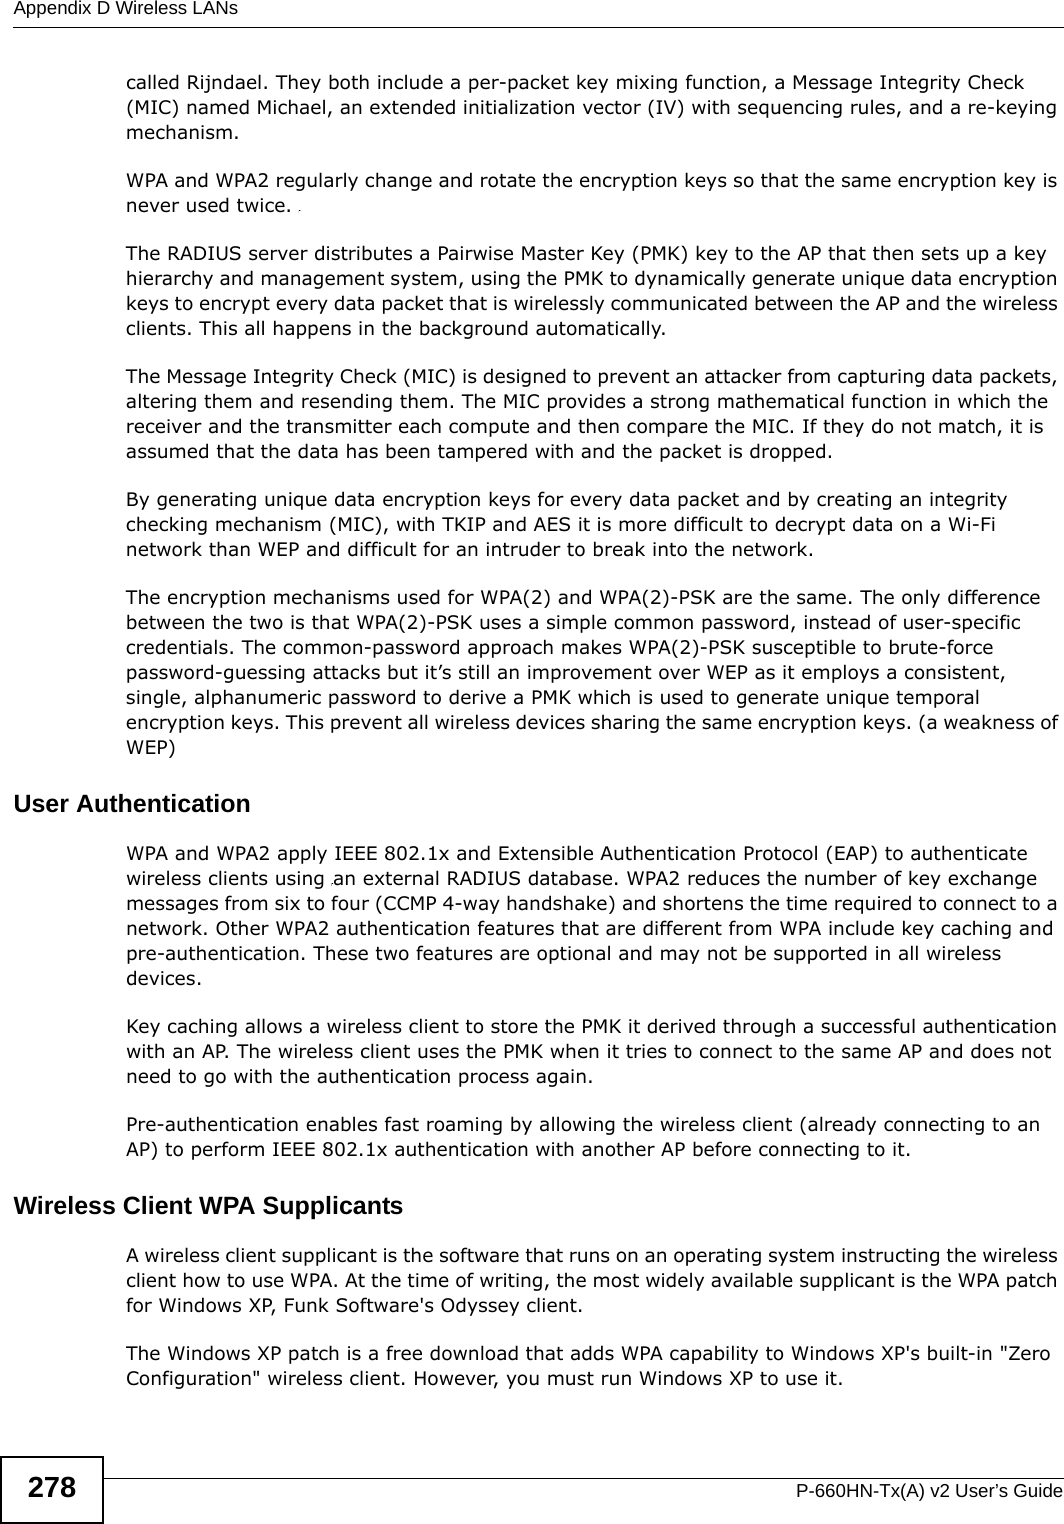 Appendix D Wireless LANsP-660HN-Tx(A) v2 User’s Guide278called Rijndael. They both include a per-packet key mixing function, a Message Integrity Check (MIC) named Michael, an extended initialization vector (IV) with sequencing rules, and a re-keying mechanism.WPA and WPA2 regularly change and rotate the encryption keys so that the same encryption key is never used twice. The RADIUS server distributes a Pairwise Master Key (PMK) key to the AP that then sets up a key hierarchy and management system, using the PMK to dynamically generate unique data encryption keys to encrypt every data packet that is wirelessly communicated between the AP and the wireless clients. This all happens in the background automatically.The Message Integrity Check (MIC) is designed to prevent an attacker from capturing data packets, altering them and resending them. The MIC provides a strong mathematical function in which the receiver and the transmitter each compute and then compare the MIC. If they do not match, it is assumed that the data has been tampered with and the packet is dropped. By generating unique data encryption keys for every data packet and by creating an integrity checking mechanism (MIC), with TKIP and AES it is more difficult to decrypt data on a Wi-Fi network than WEP and difficult for an intruder to break into the network. The encryption mechanisms used for WPA(2) and WPA(2)-PSK are the same. The only difference between the two is that WPA(2)-PSK uses a simple common password, instead of user-specific credentials. The common-password approach makes WPA(2)-PSK susceptible to brute-force password-guessing attacks but it’s still an improvement over WEP as it employs a consistent, single, alphanumeric password to derive a PMK which is used to generate unique temporal encryption keys. This prevent all wireless devices sharing the same encryption keys. (a weakness of WEP)User Authentication WPA and WPA2 apply IEEE 802.1x and Extensible Authentication Protocol (EAP) to authenticate wireless clients using an external RADIUS database. WPA2 reduces the number of key exchange messages from six to four (CCMP 4-way handshake) and shortens the time required to connect to a network. Other WPA2 authentication features that are different from WPA include key caching and pre-authentication. These two features are optional and may not be supported in all wireless devices.Key caching allows a wireless client to store the PMK it derived through a successful authentication with an AP. The wireless client uses the PMK when it tries to connect to the same AP and does not need to go with the authentication process again.Pre-authentication enables fast roaming by allowing the wireless client (already connecting to an AP) to perform IEEE 802.1x authentication with another AP before connecting to it.Wireless Client WPA SupplicantsA wireless client supplicant is the software that runs on an operating system instructing the wireless client how to use WPA. At the time of writing, the most widely available supplicant is the WPA patch for Windows XP, Funk Software&apos;s Odyssey client. The Windows XP patch is a free download that adds WPA capability to Windows XP&apos;s built-in &quot;Zero Configuration&quot; wireless client. However, you must run Windows XP to use it. 